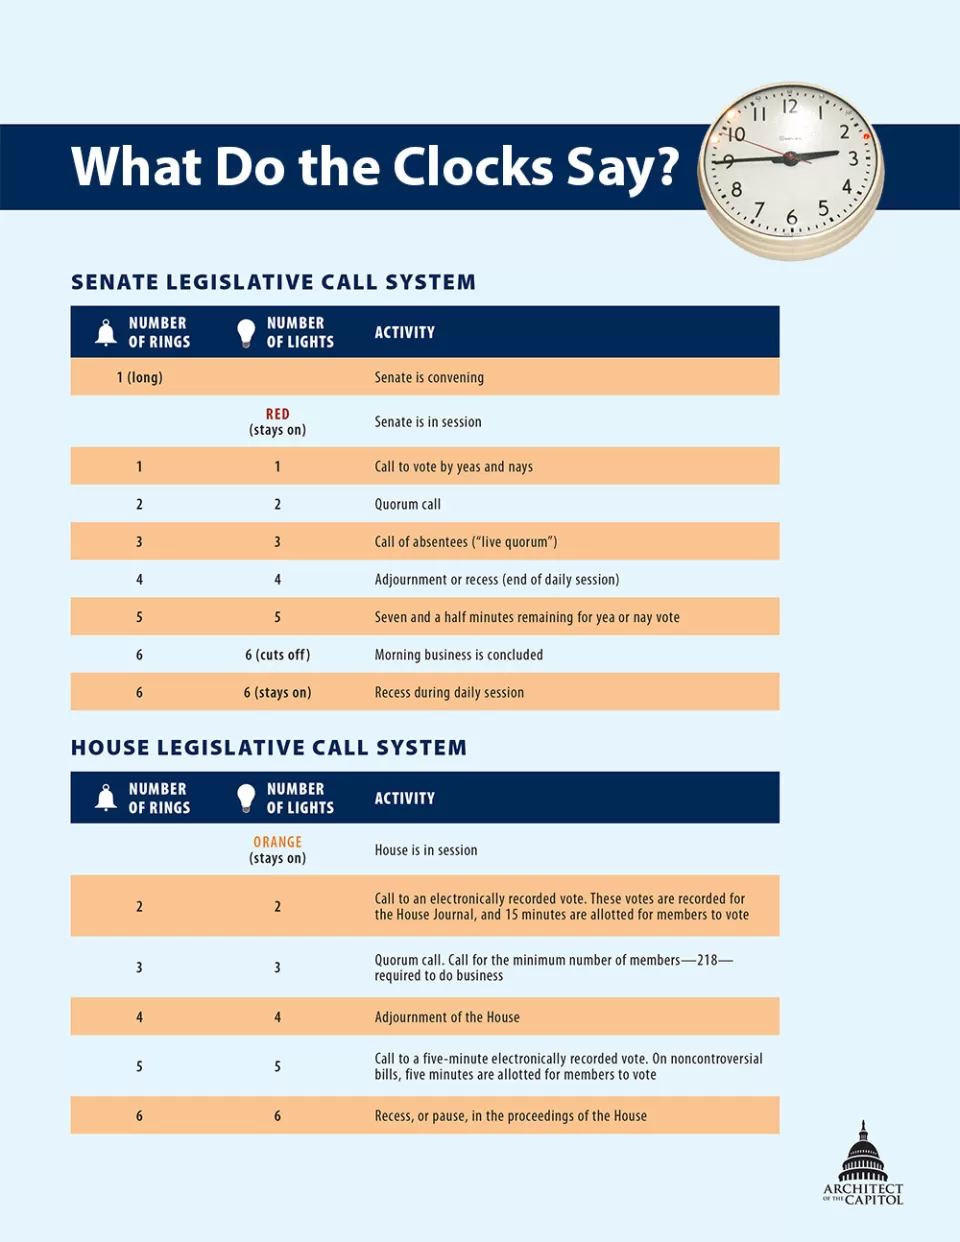 What do the clocks say? This chart explains the different lights and bell rings for the legislative call system.